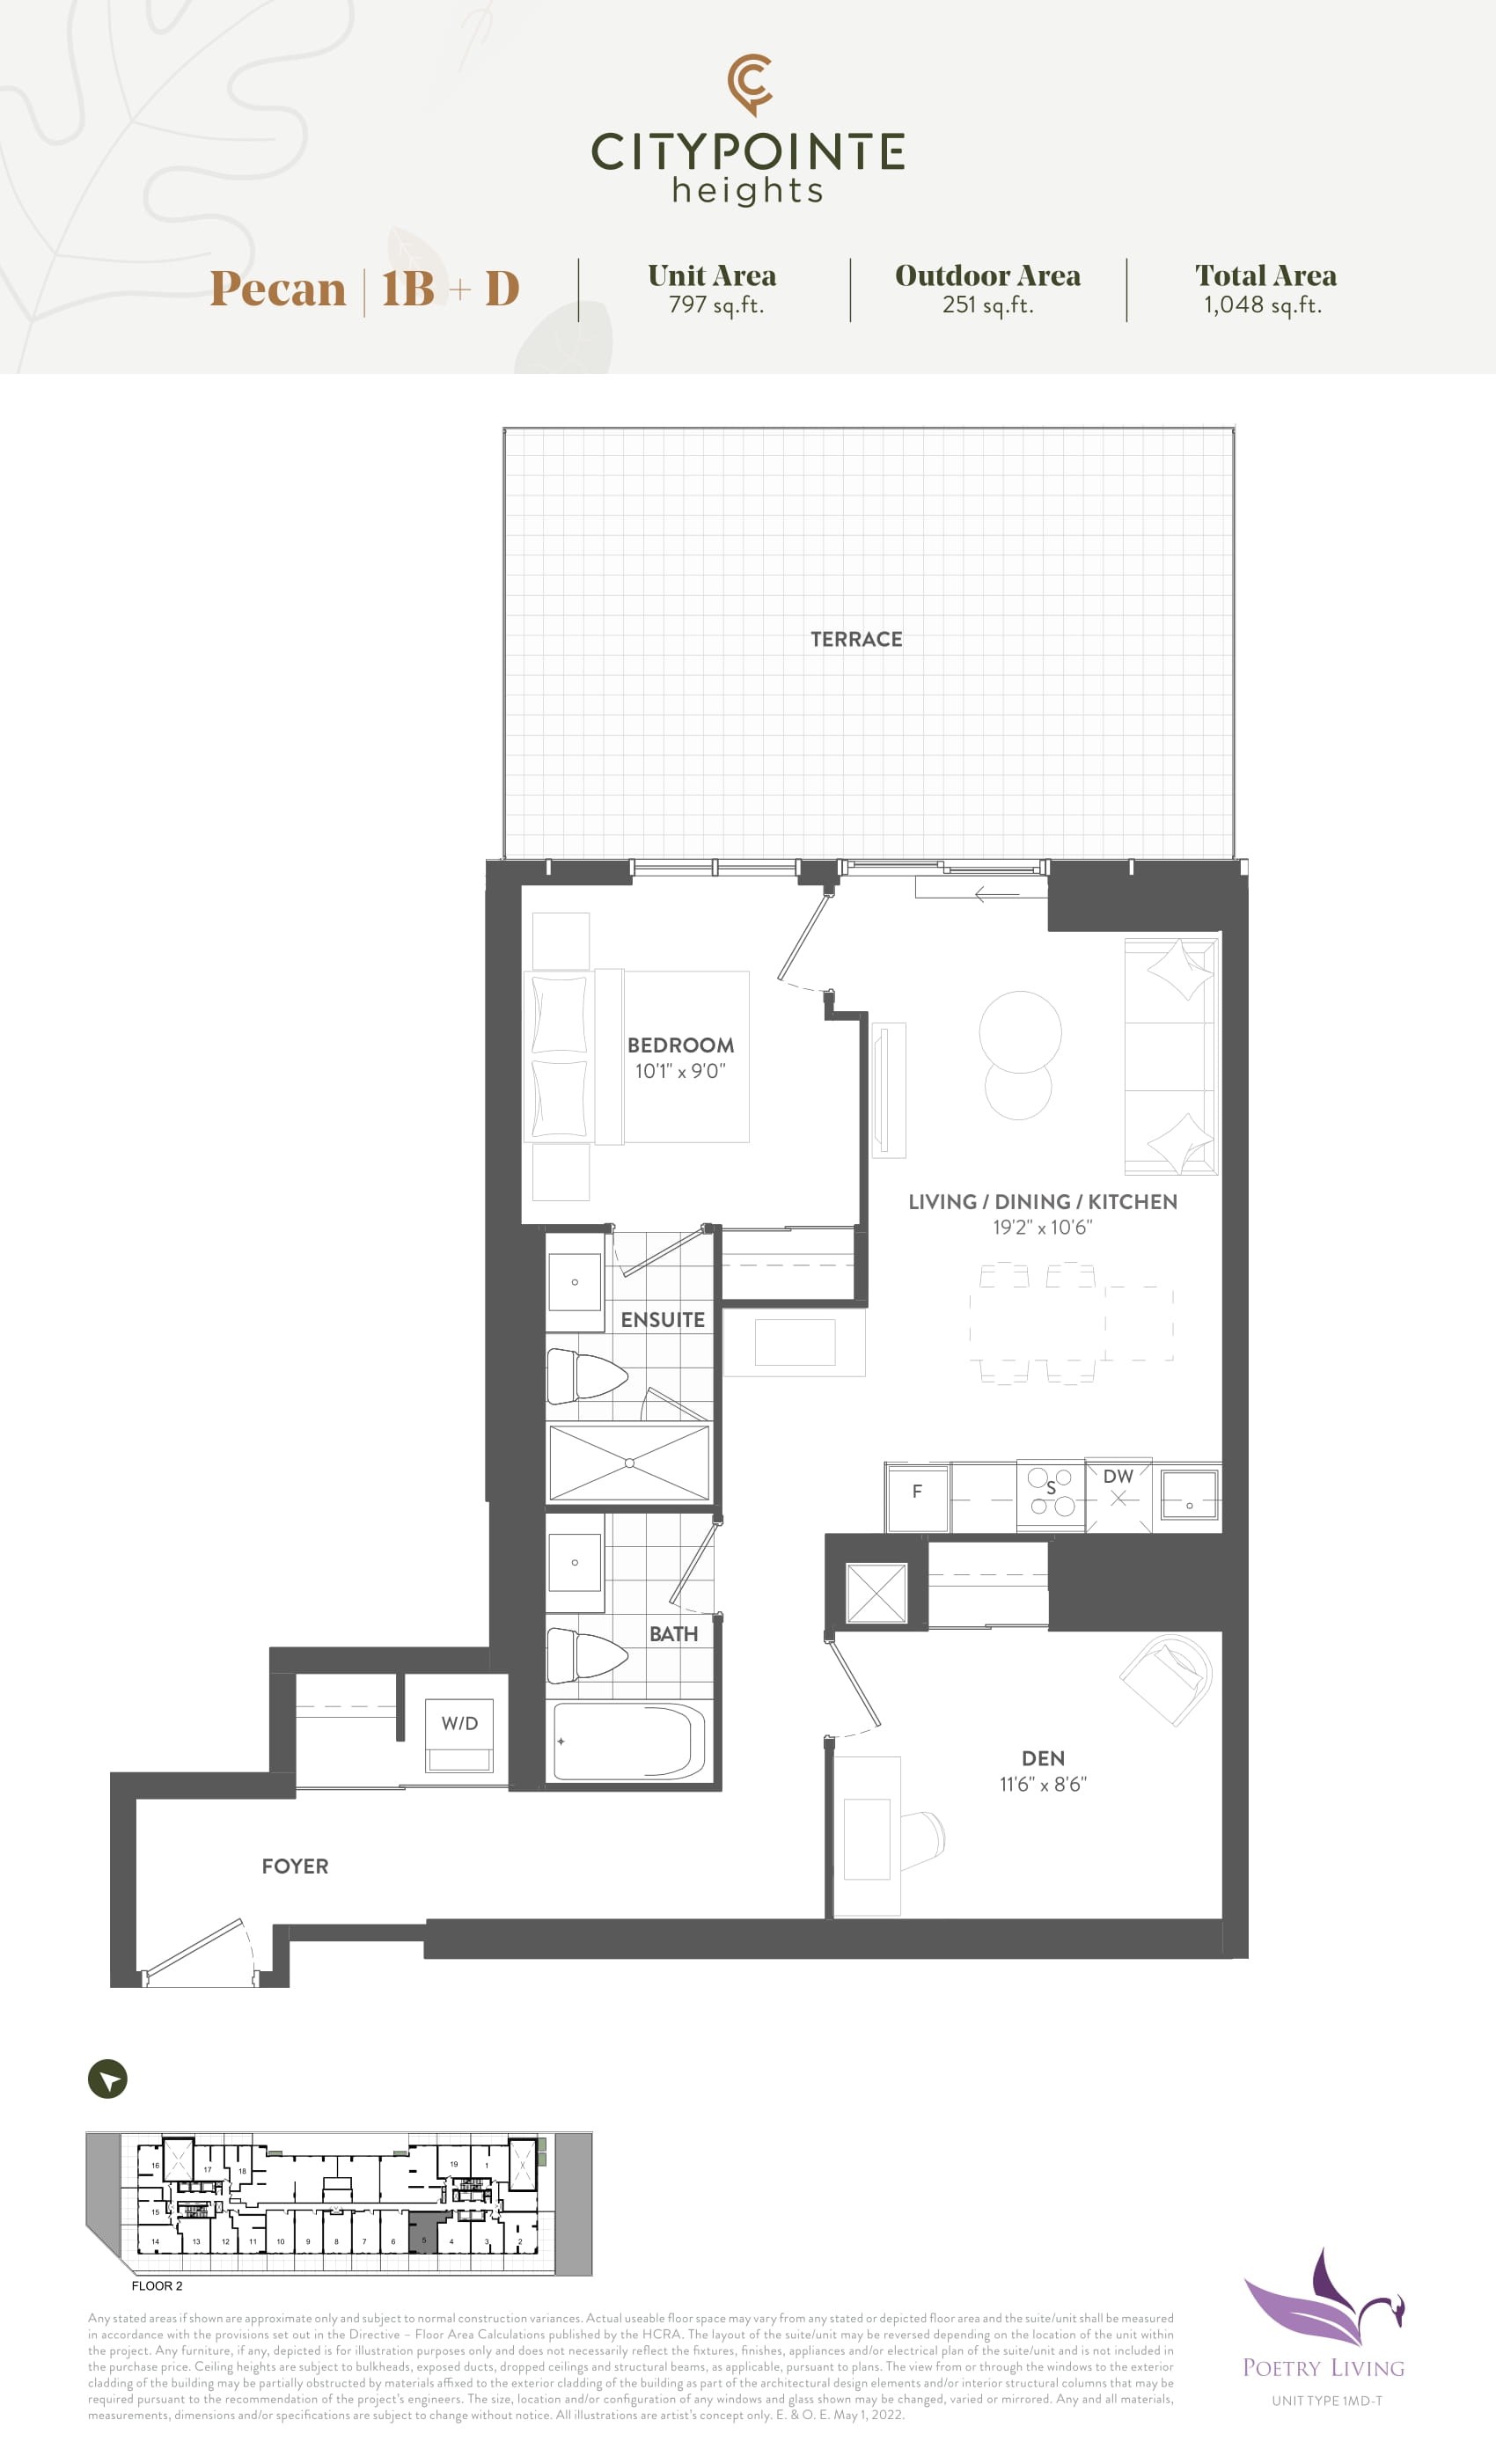  Floor Plan of CityPointe Heights with undefined beds